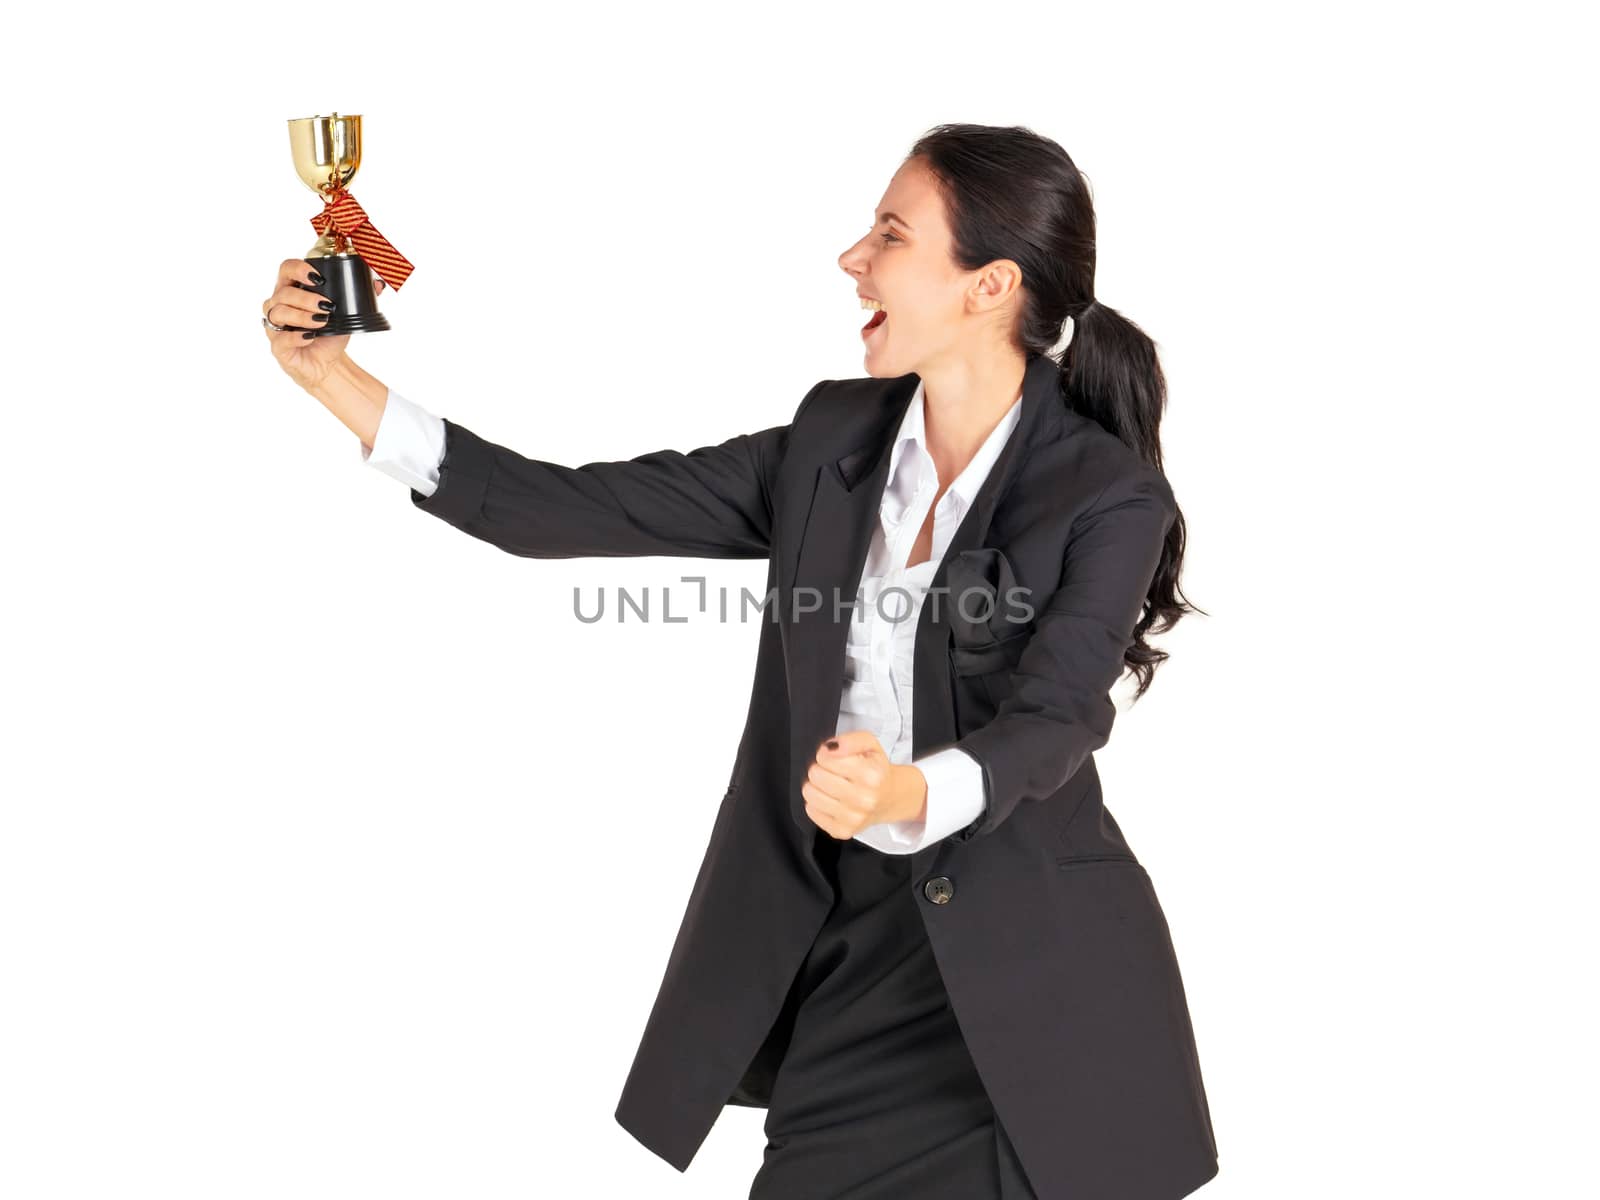 A businesswoman in a black suit with a smile looking at the trophy received from the work done proudly. Portrait on white background with studio light.